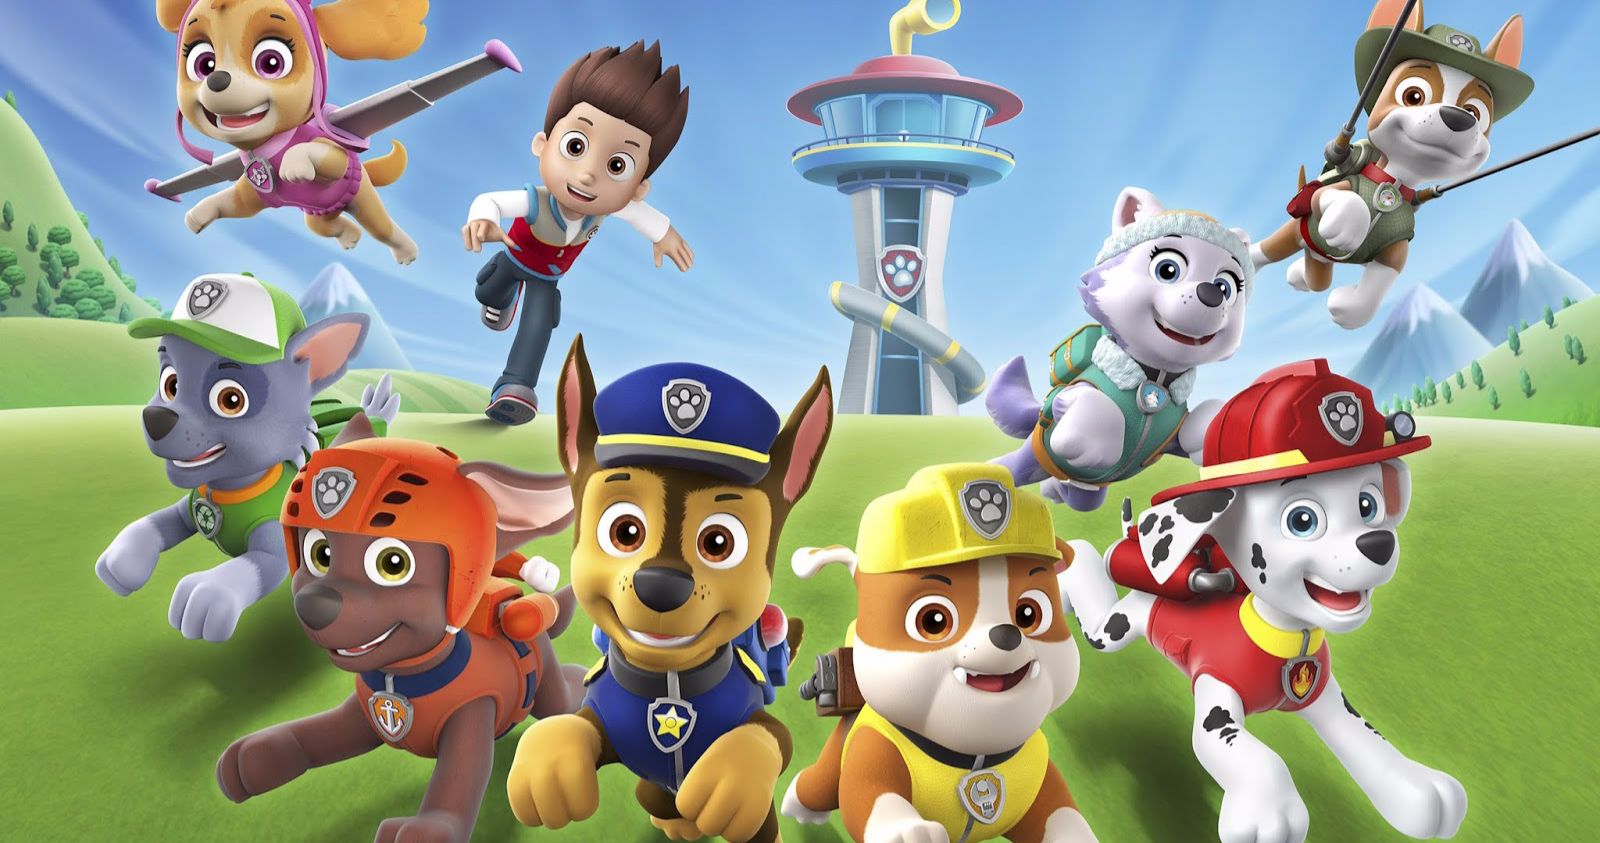 White House Claims Paw Patrol Was Canceled, But It Wasn't